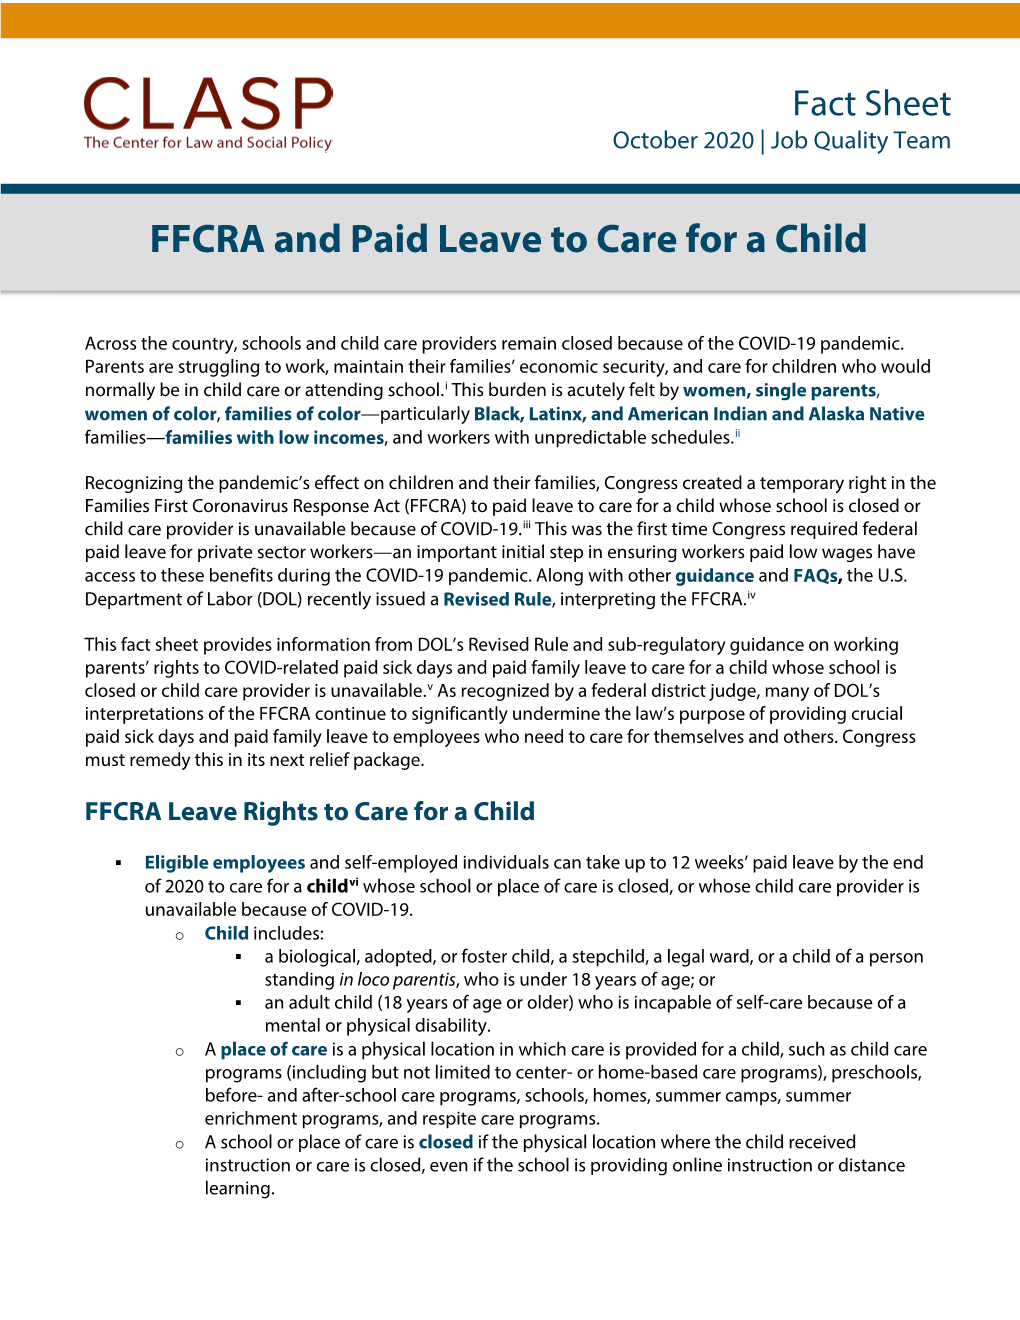 FFCRA and Paid Leave to Care for a Child